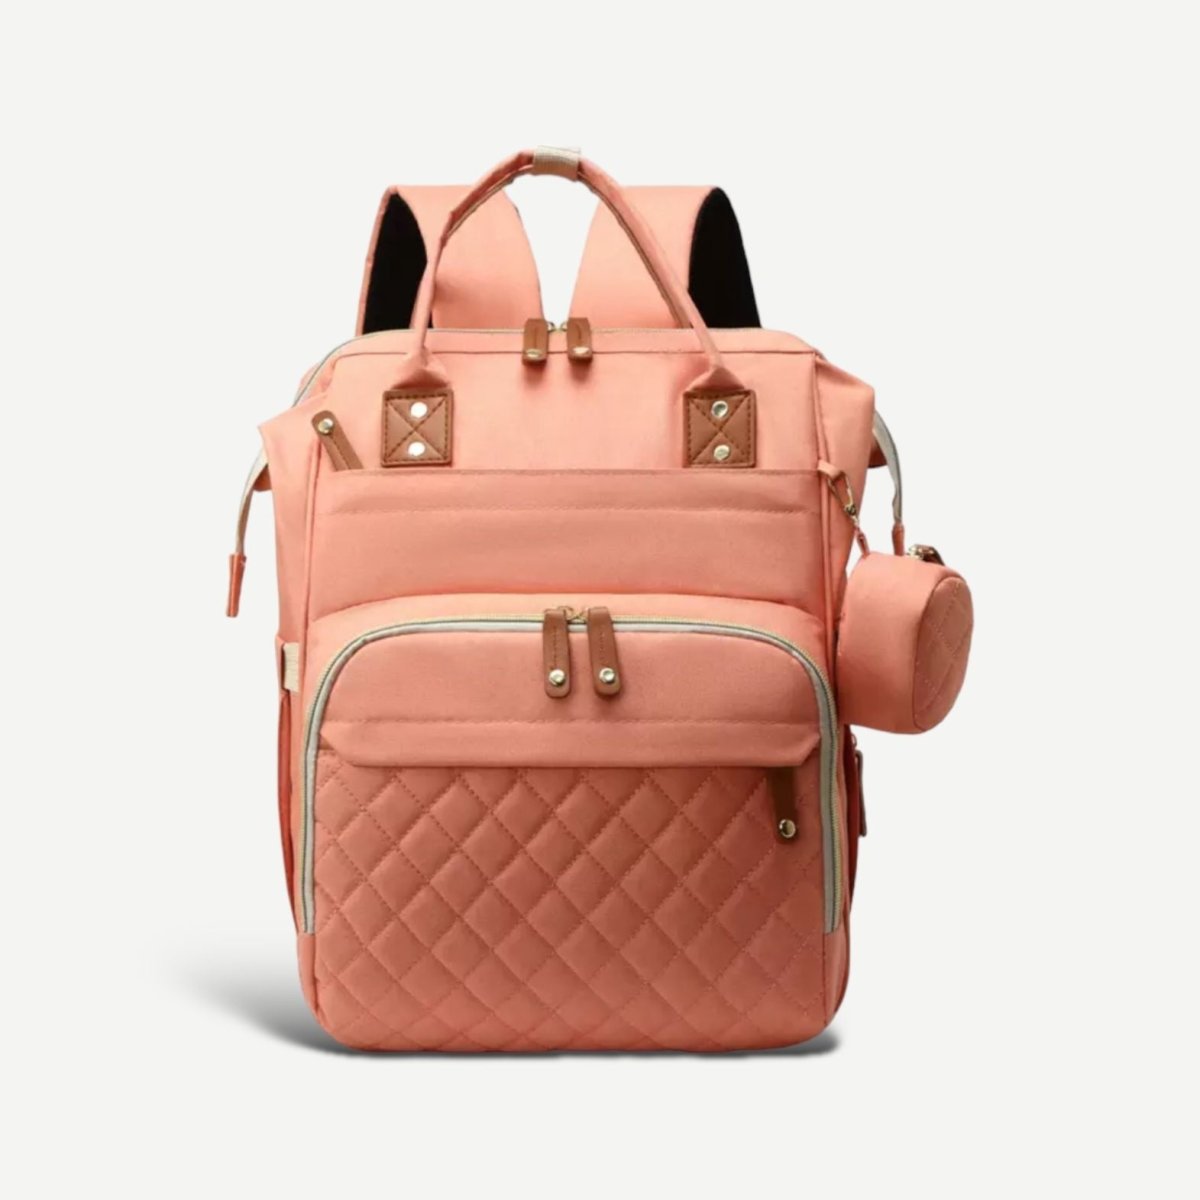 Nappy Backpack - Mimi & Co